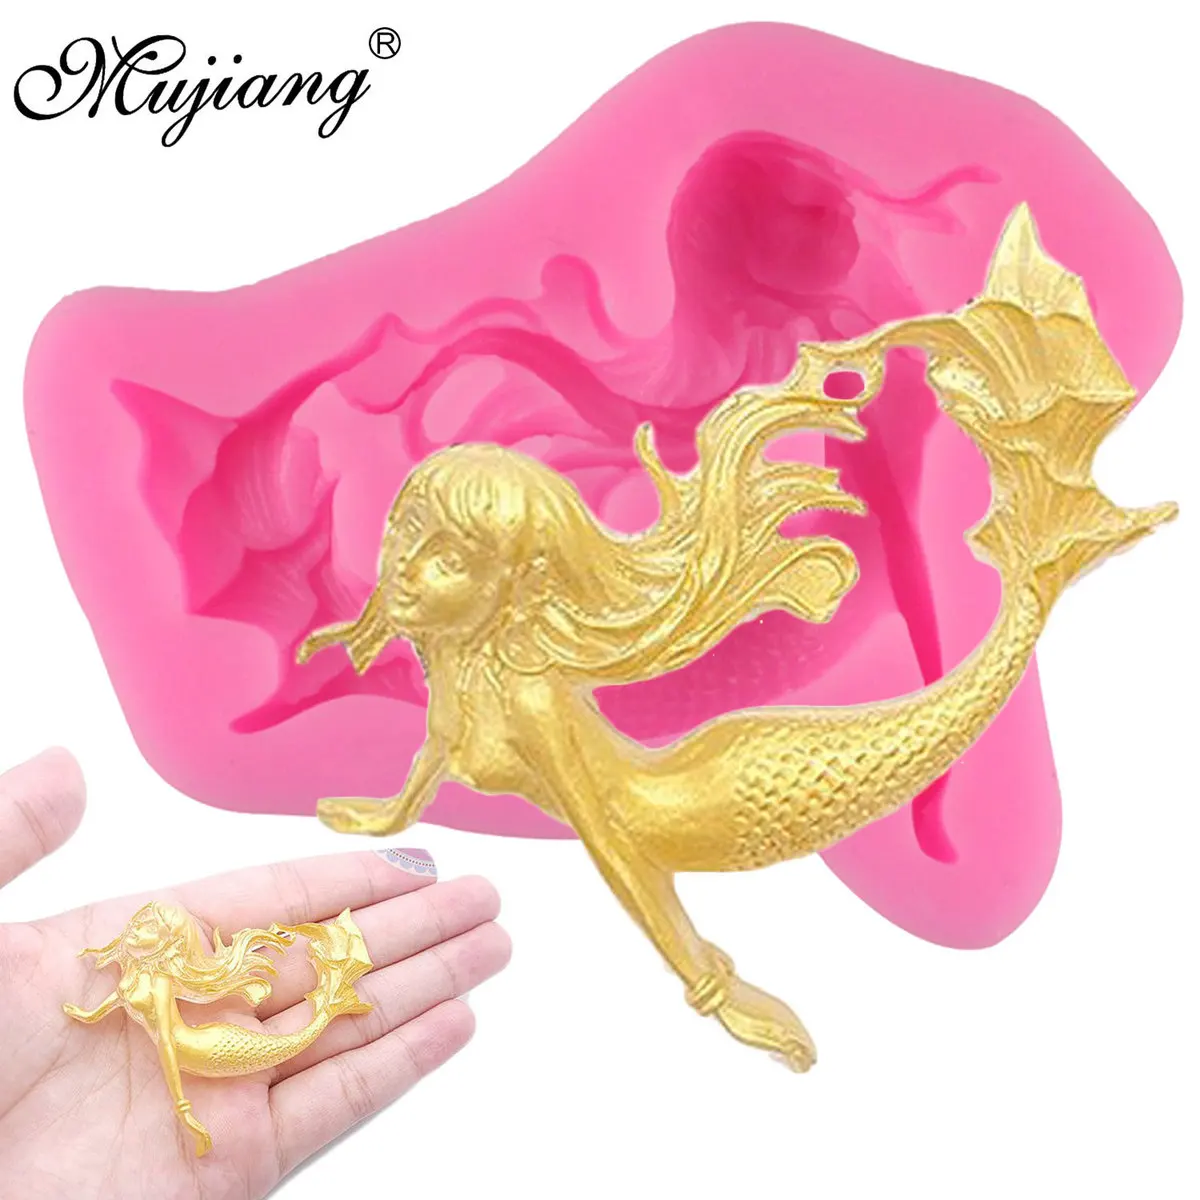 

Little Mermaid Silicone Mold Sugarcraft Fondant Chocolate Candy Gumpaste Mold Cupcake Topper Cookie Baking Cake Decorating Tools